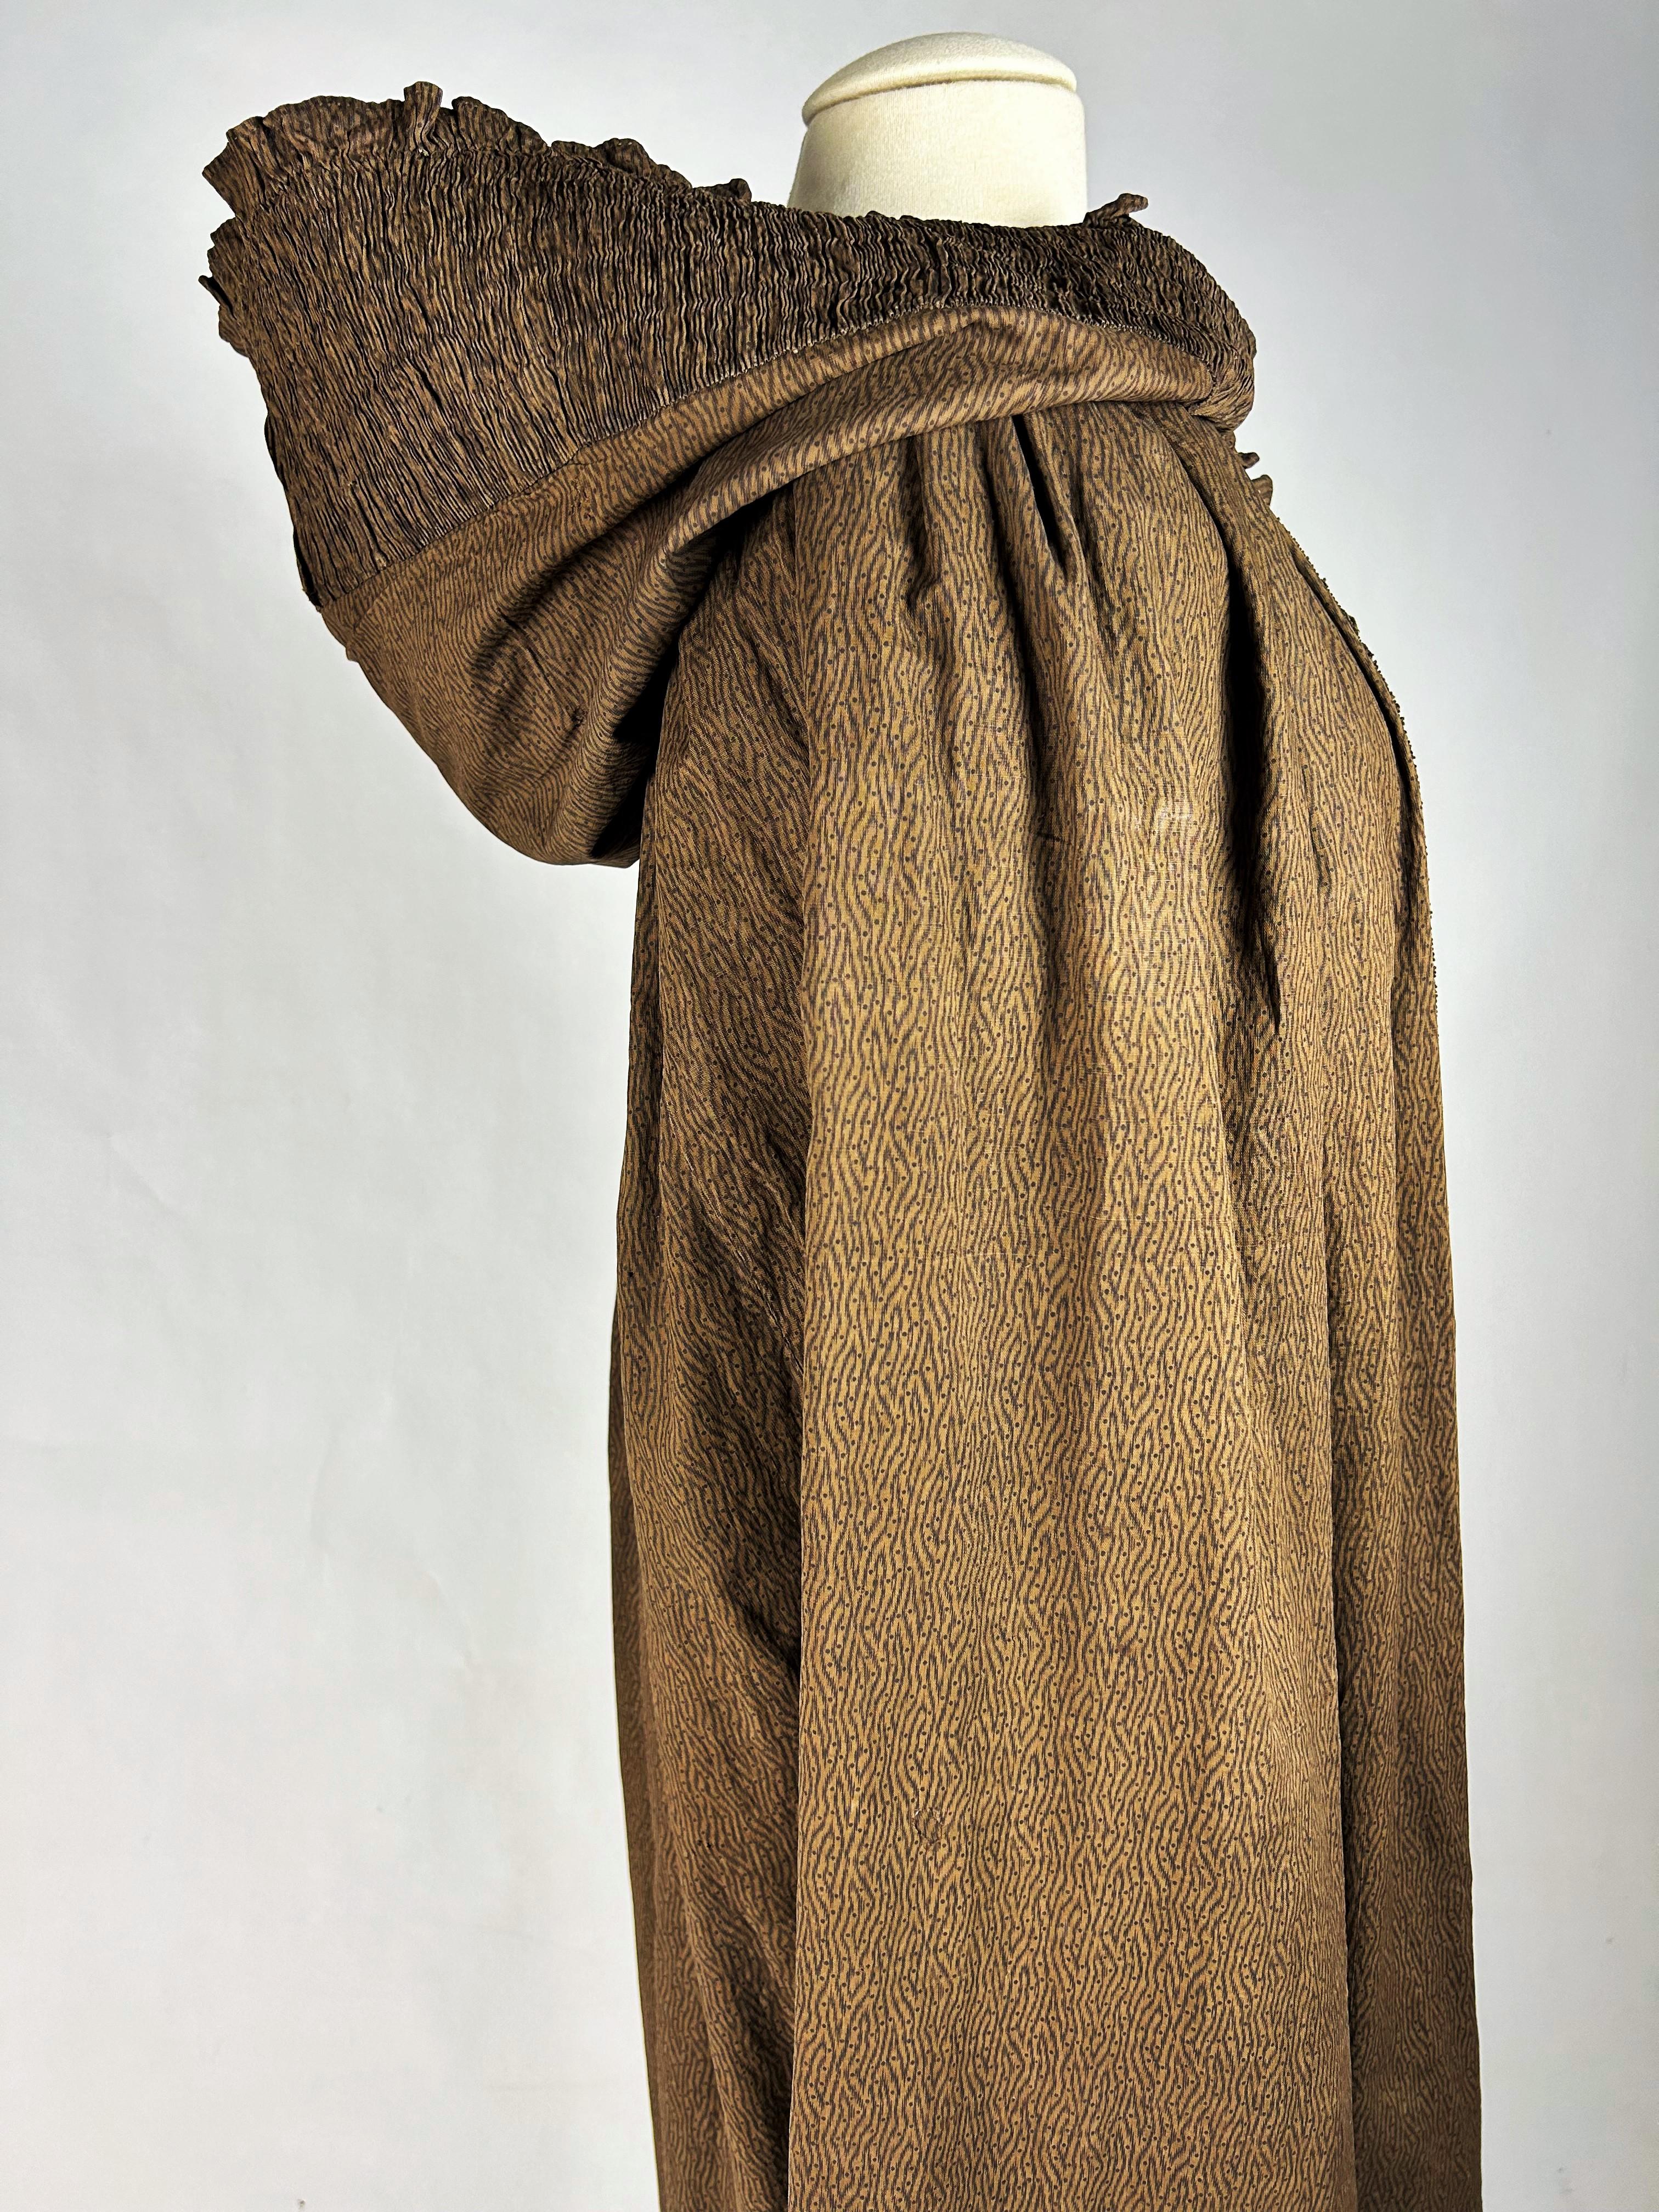 A French printed cotton hooded Long Cloak - Provence Early 19th Century For Sale 8